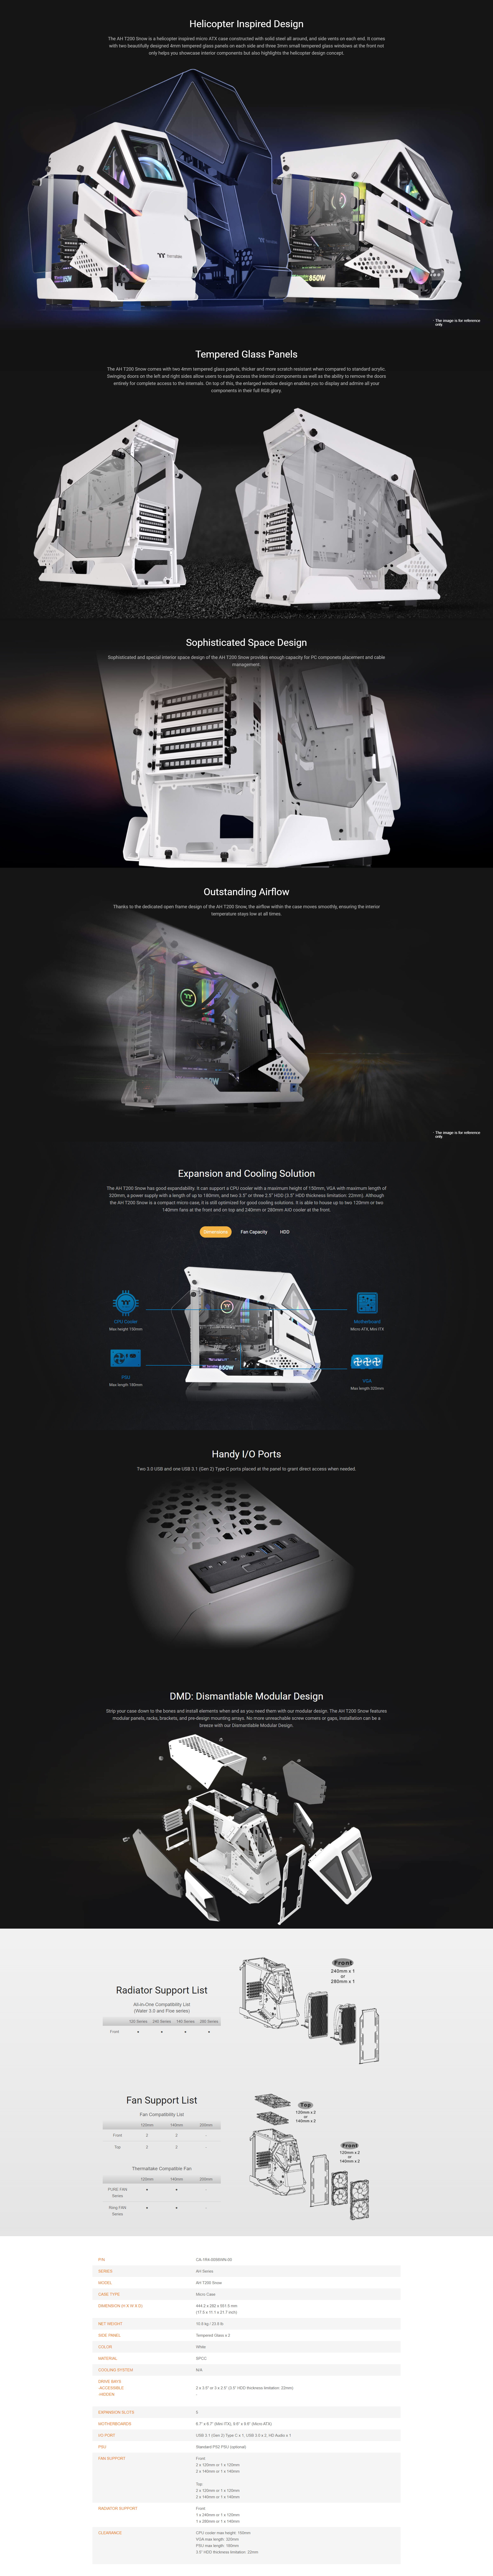 A large marketing image providing additional information about the product Thermaltake AH T200 TG - Micro Tower Case (Snow) - Additional alt info not provided